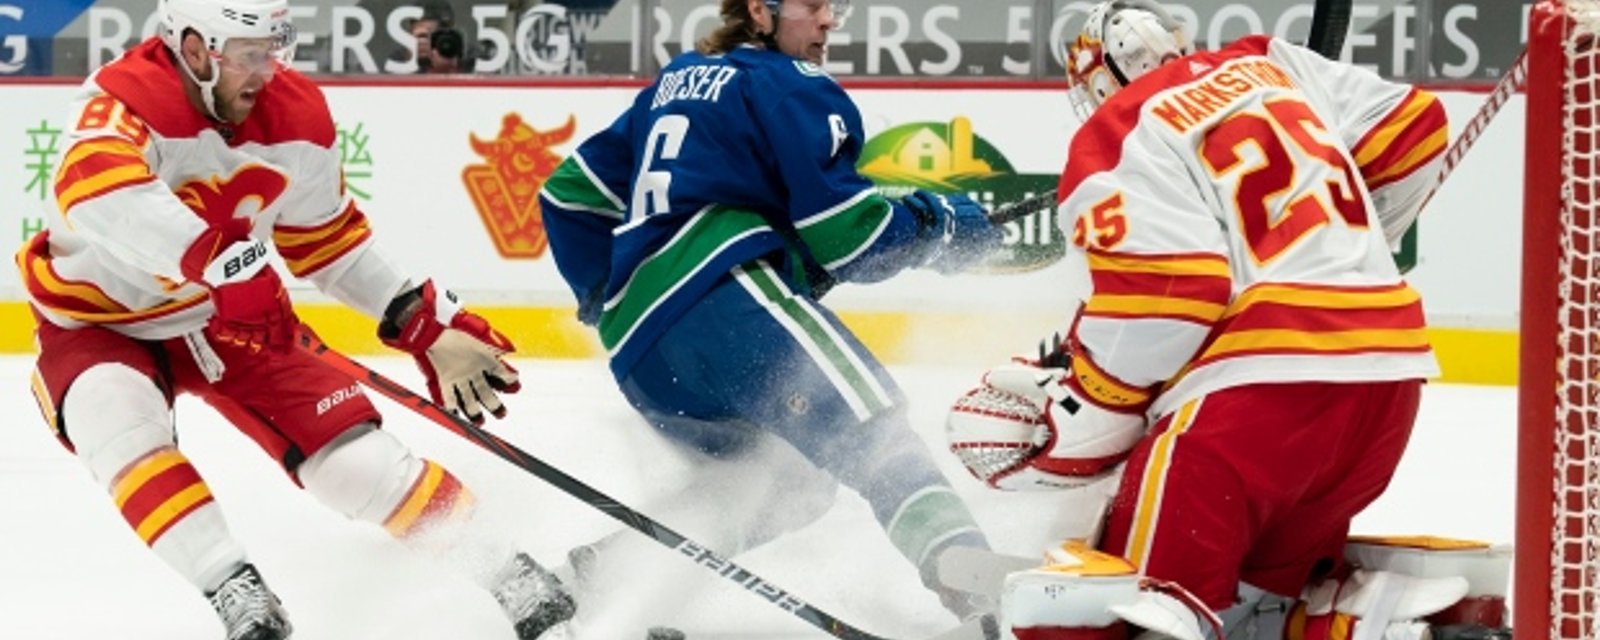 Trade brewing between rivals Flames and Canucks?!